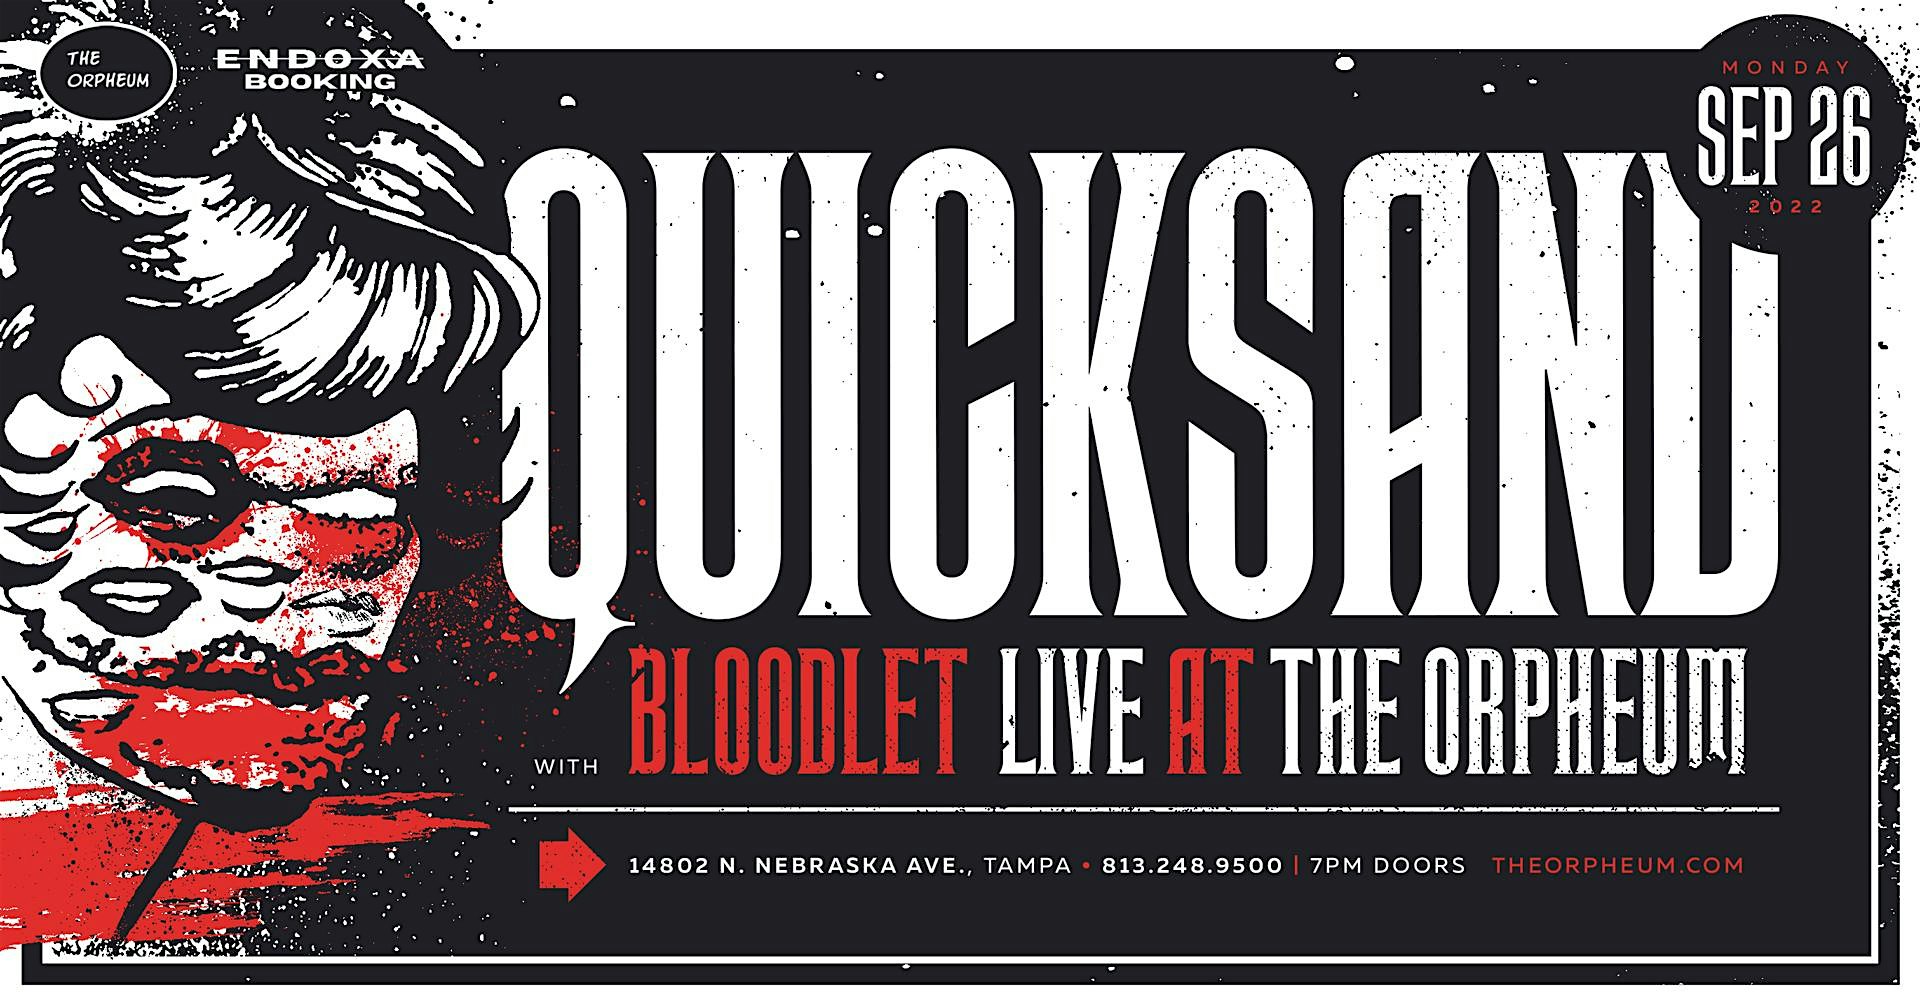 Quicksand & Bloodlet in Tampa at the Orpheum